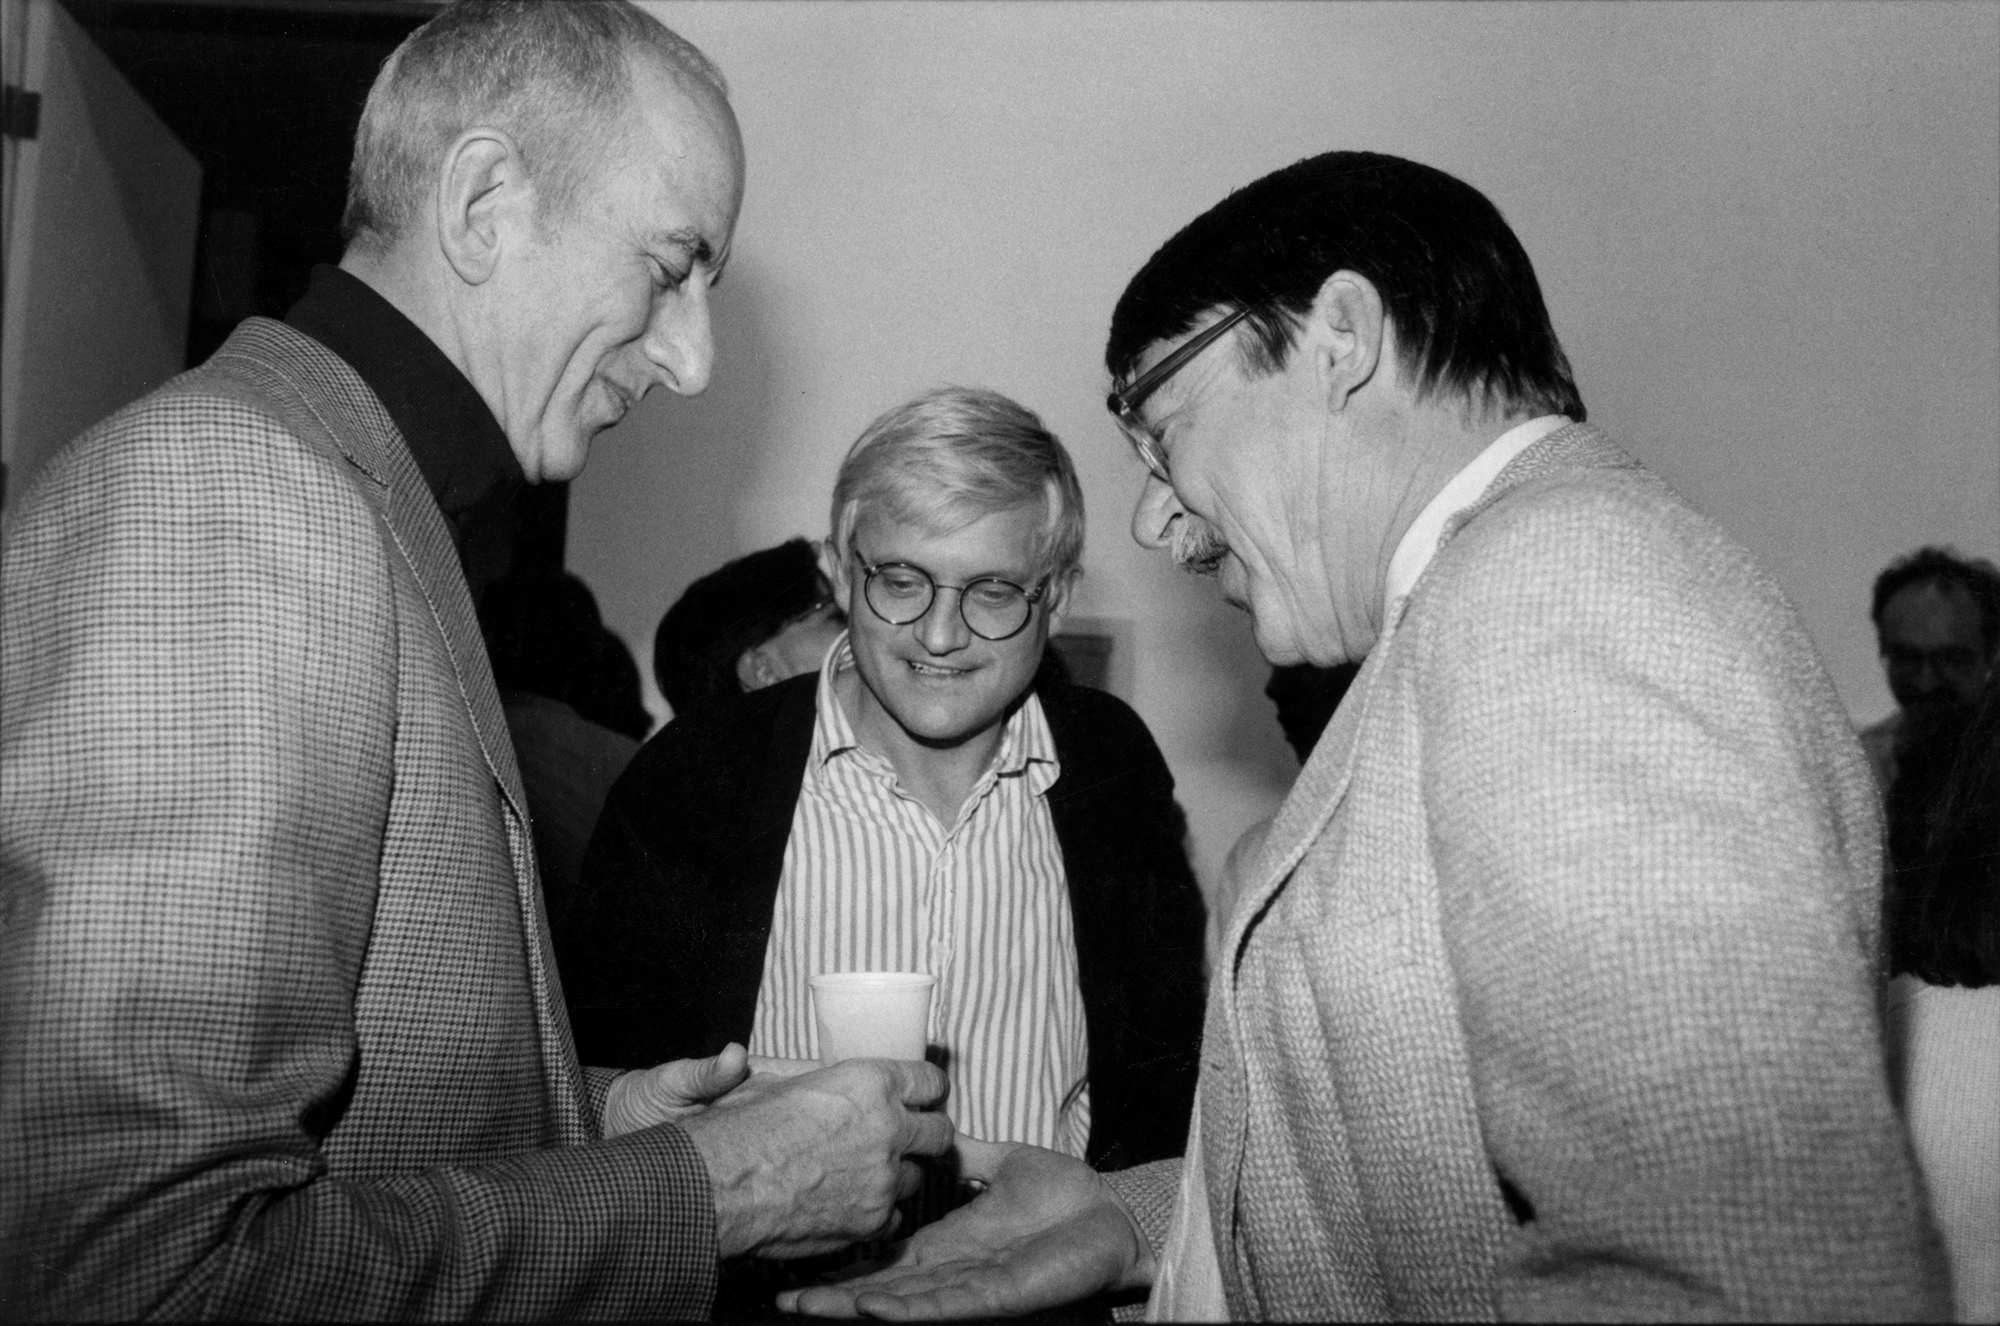 R to L: Brice, Hockney, and Diebenkorn at Brice LA Louver Exhibition opening, 1984